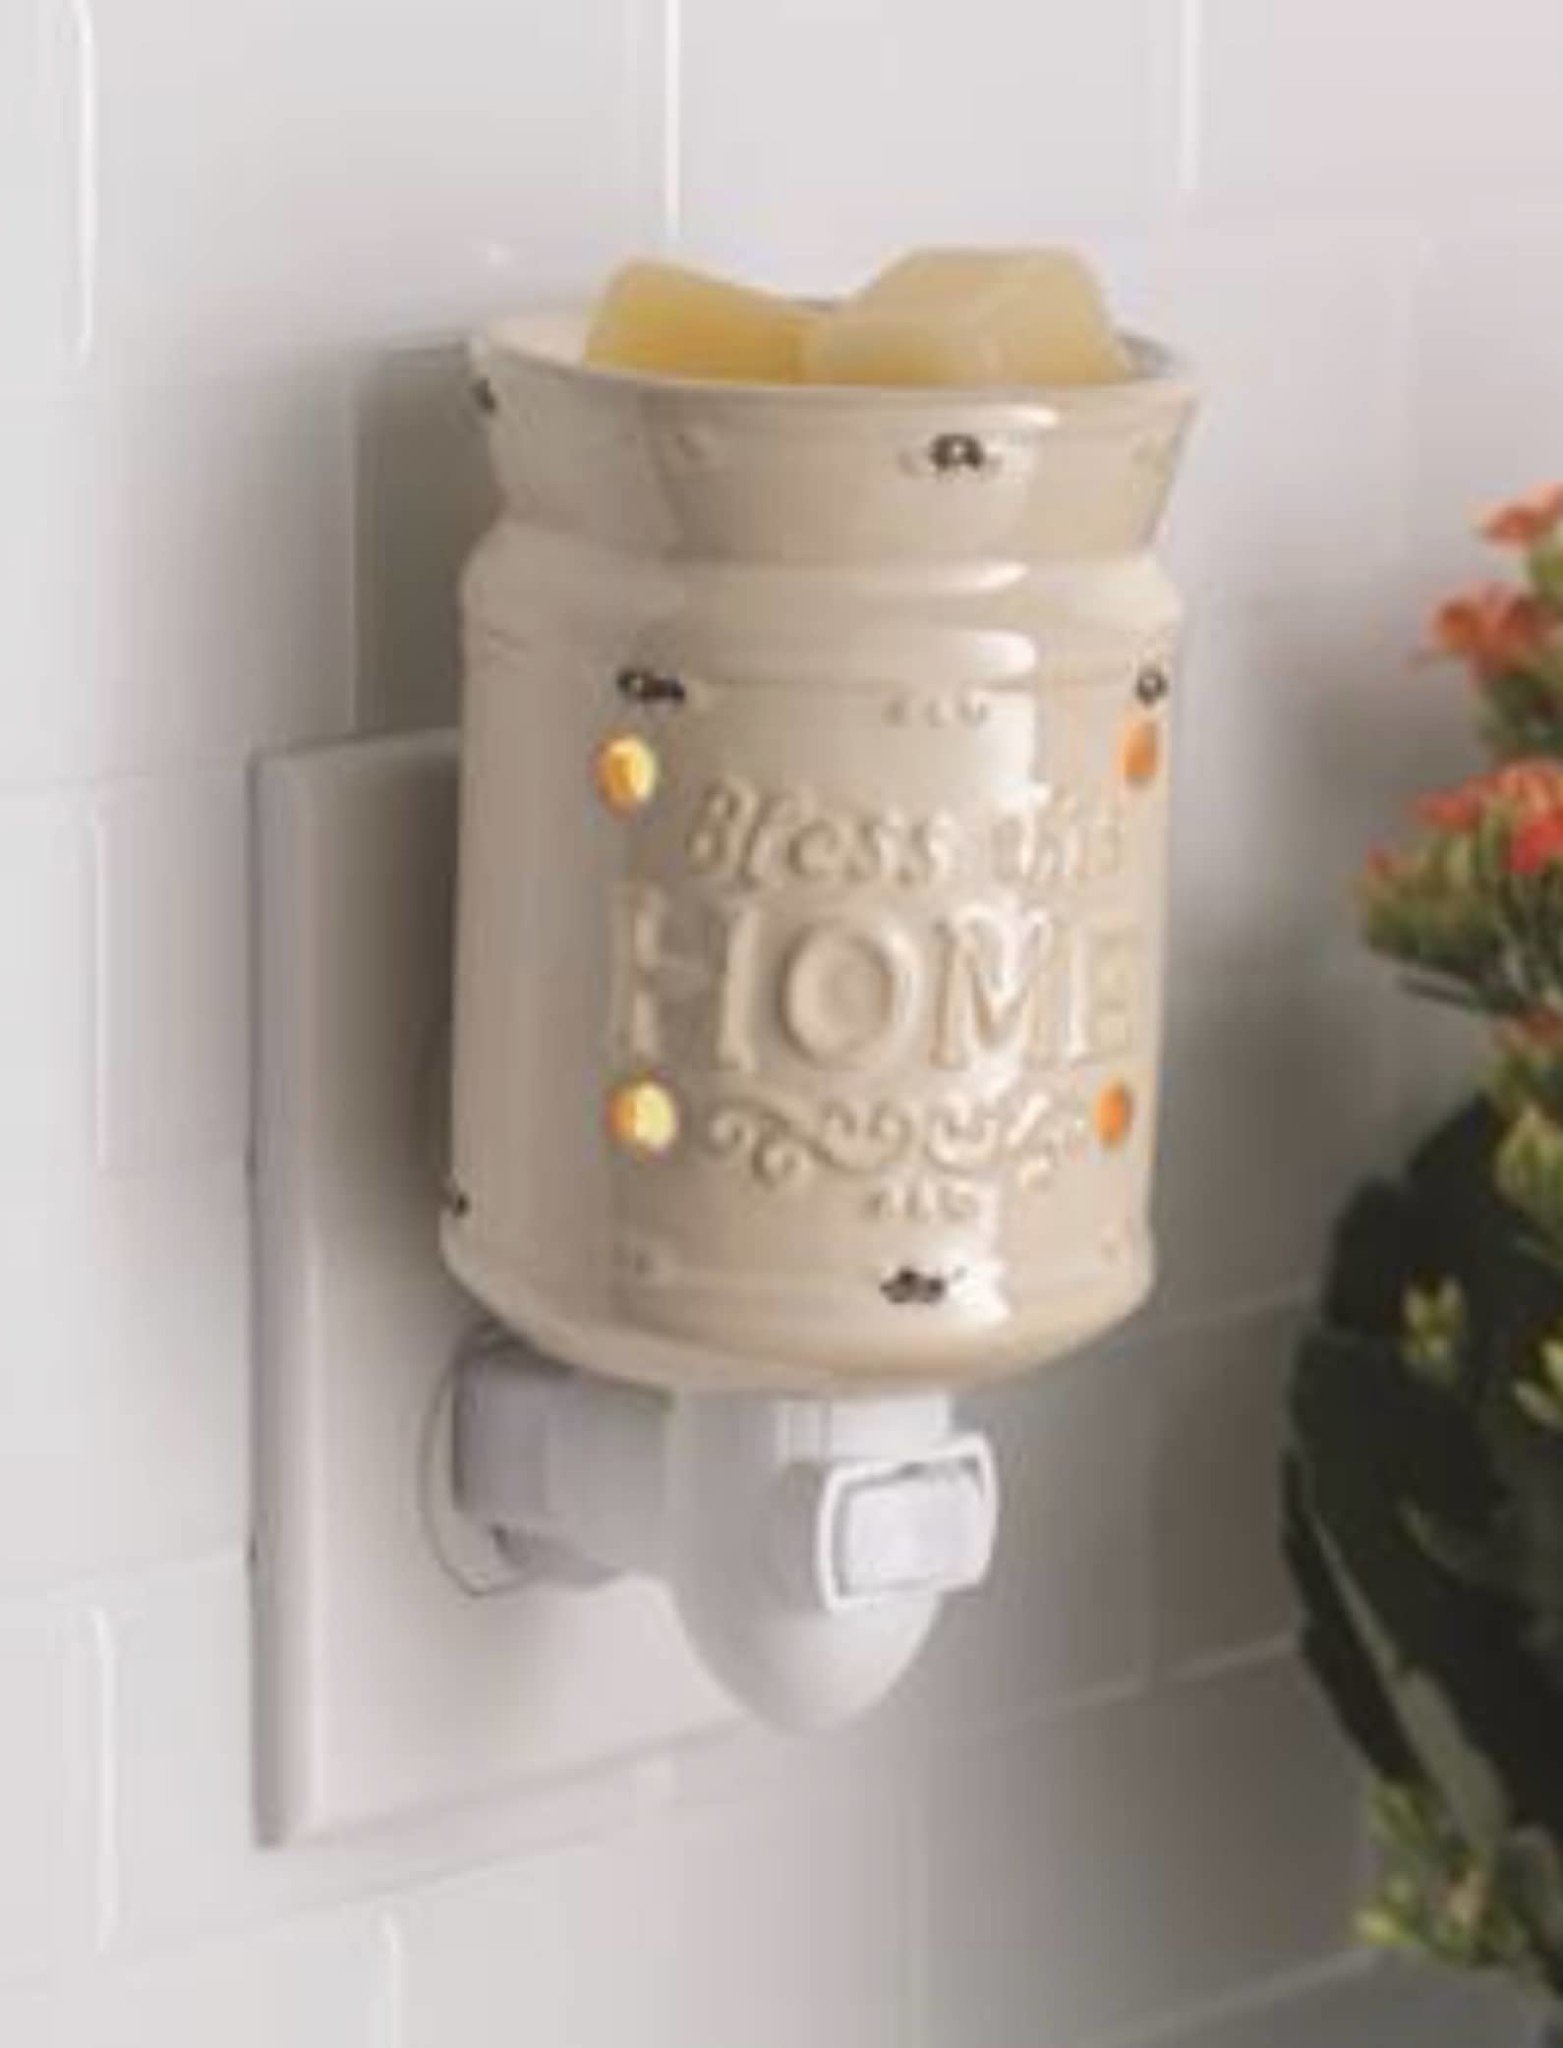 Candle Warmers Bless This Home Pluggable Fragrance Warmer Brand: Candle Warmers